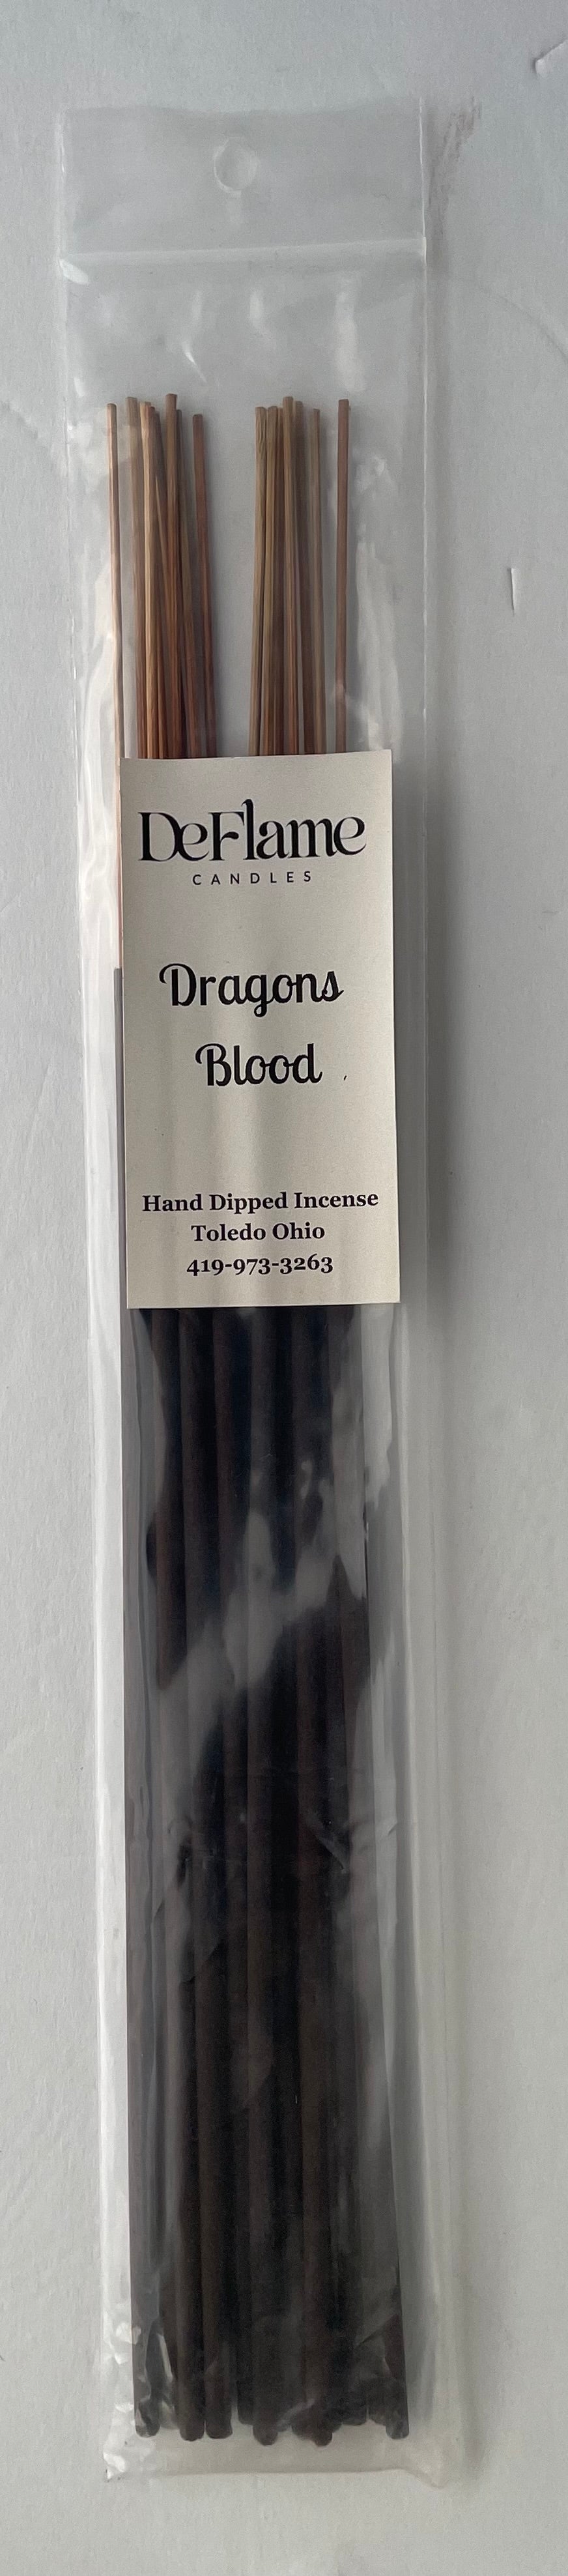 Hand-dipped Scented Incense 11 inch Premium grade